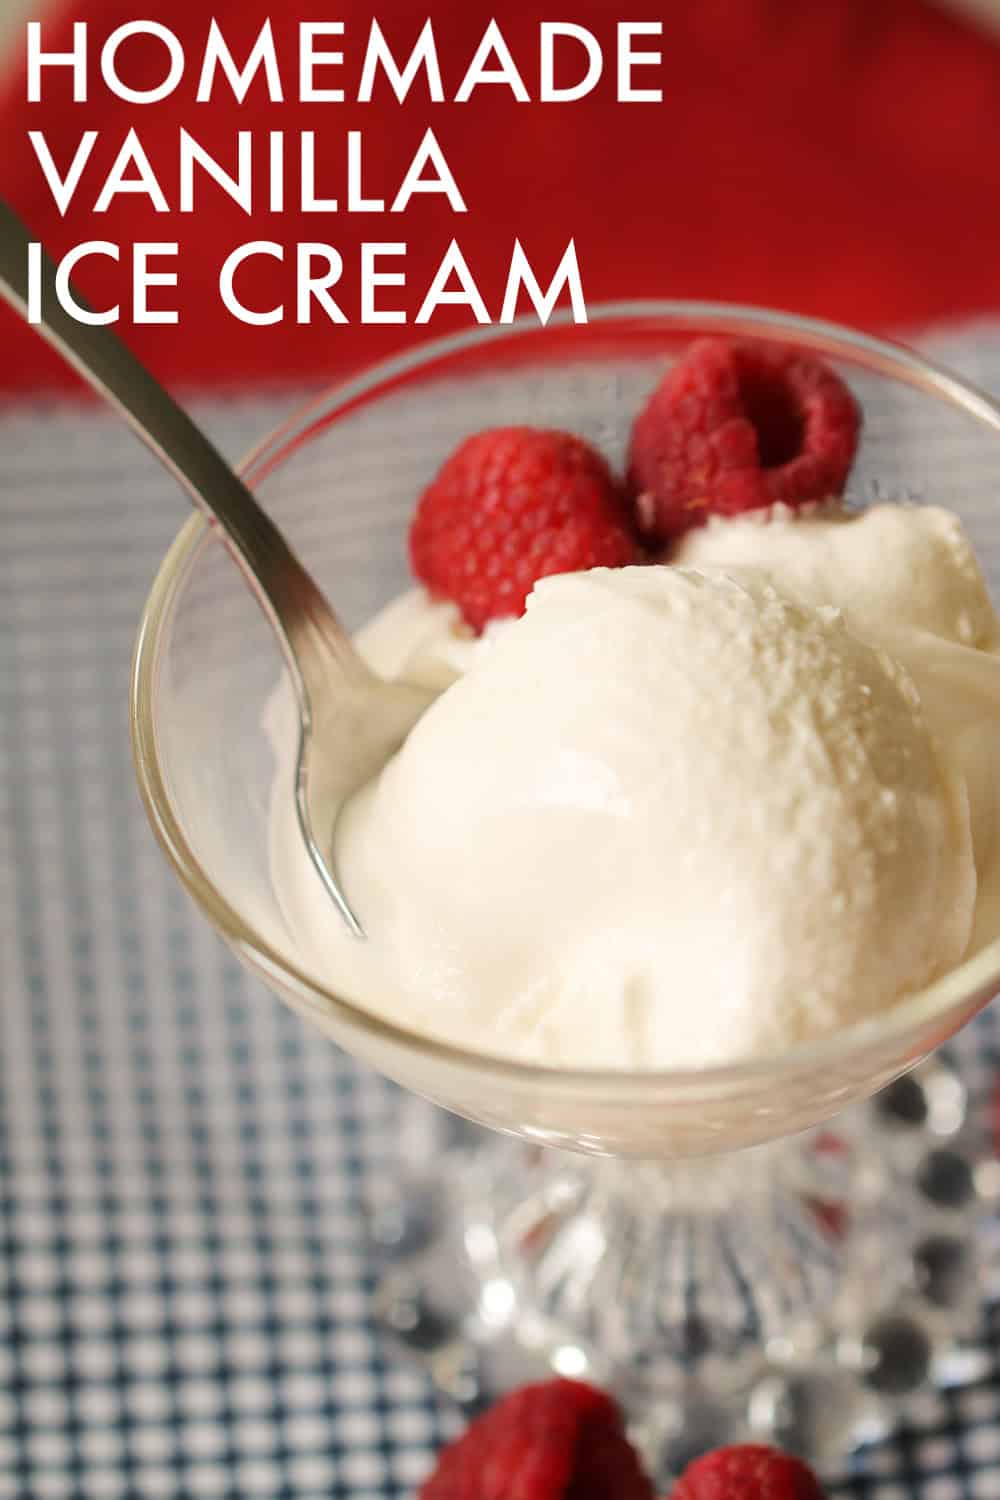 https://www.sixsistersstuff.com/wp-content/uploads/2018/07/Old-Fashioned-Homemade-Vanilla-Ice-Cream-with-Rasp-on-Six-Sisters-Stuff-with-words.jpg